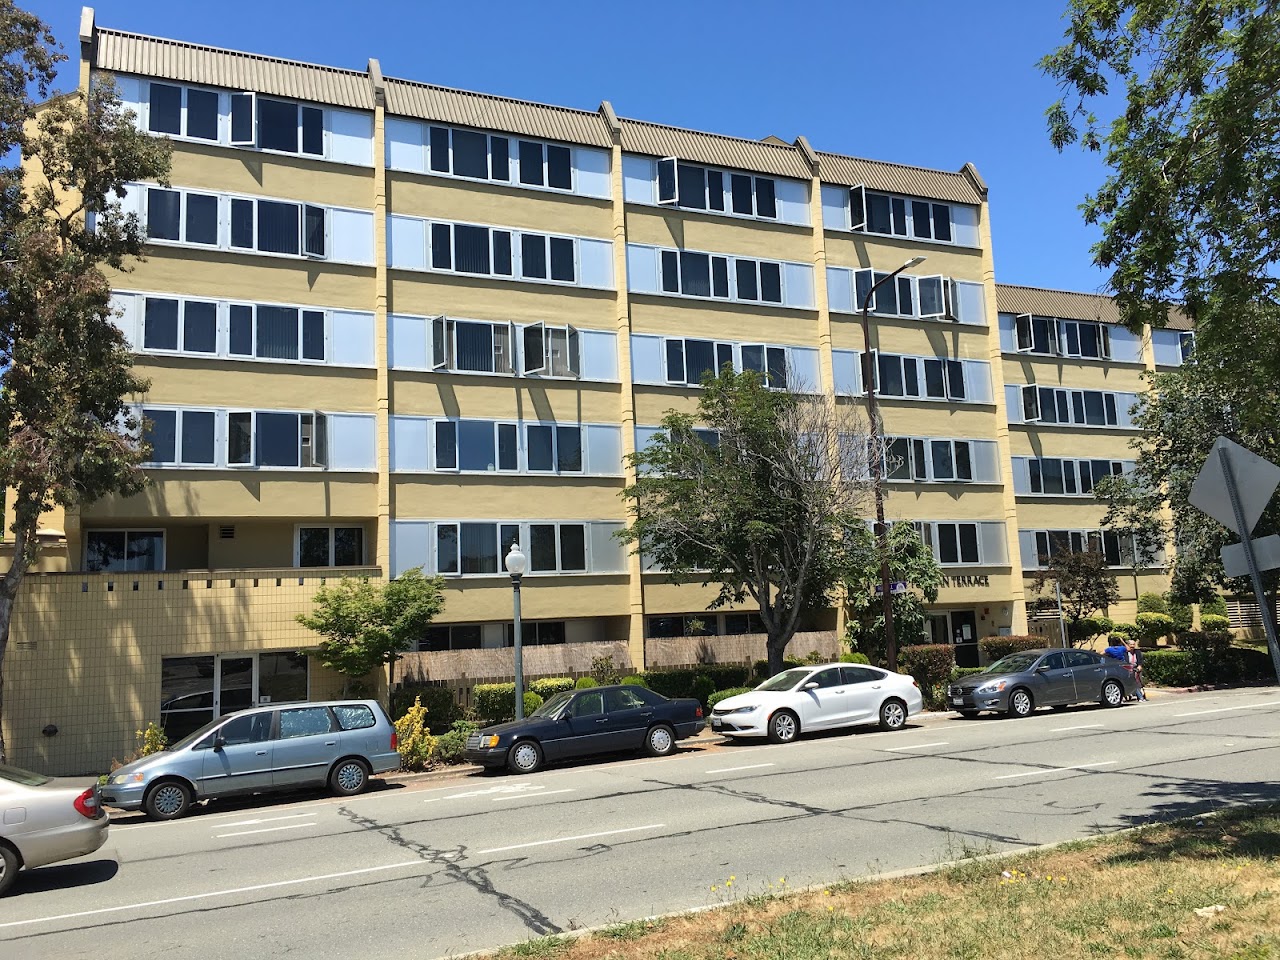 Photo of HARRIET TUBMAN TERRACE APTS. Affordable housing located at 2870 ADELINE ST BERKELEY, CA 94703